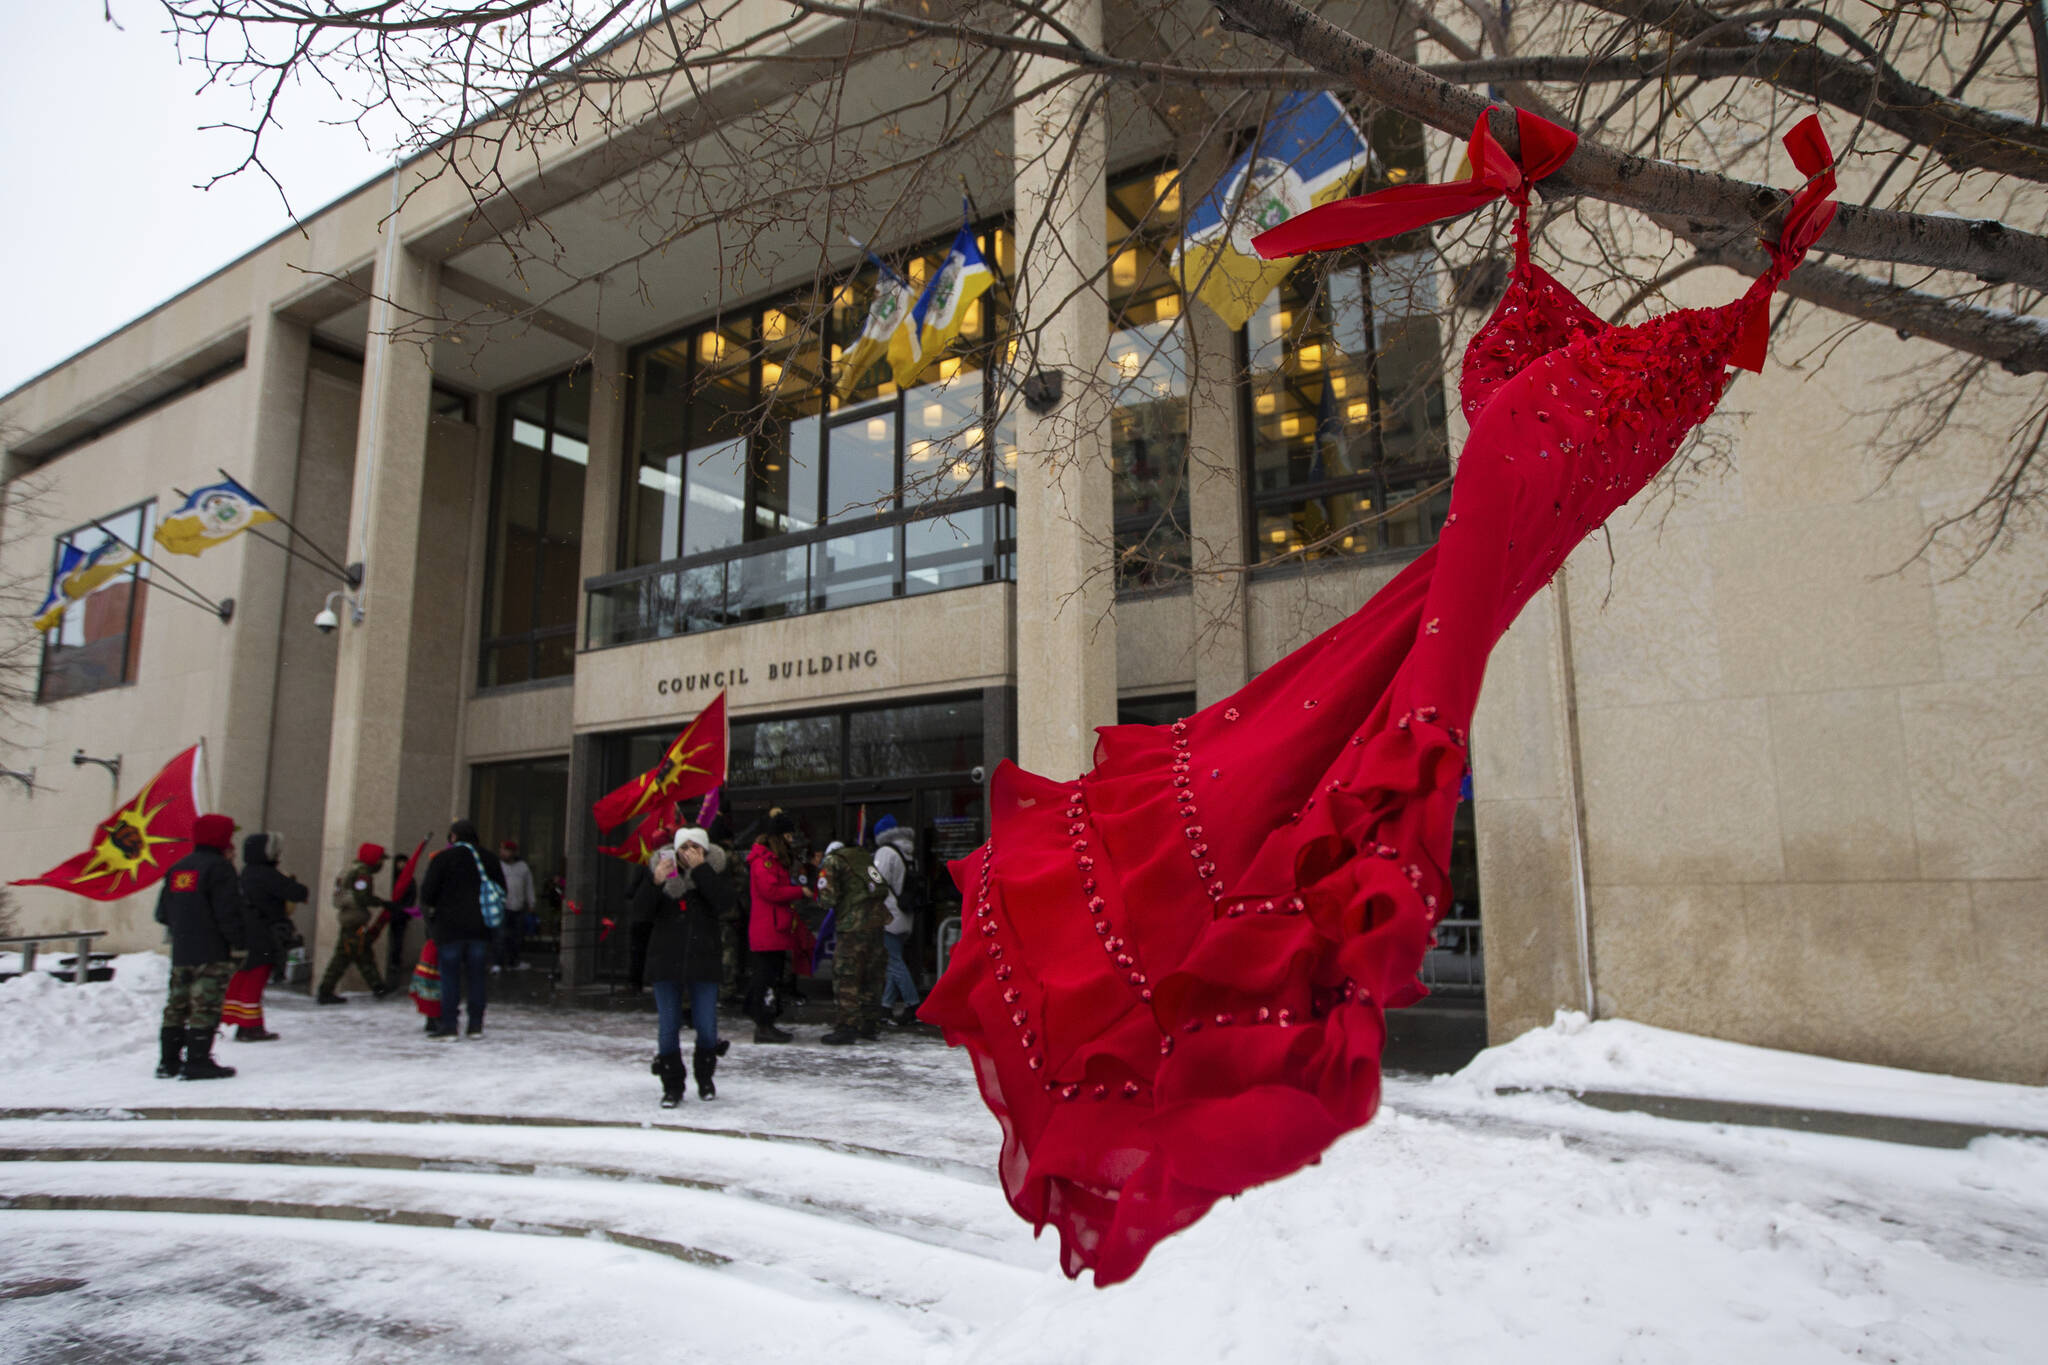 A red dress hangs on a tree in the courtyard at Winnipeg City Hall during a rally, Thursday, Dec. 15, 2022, in Winnipeg, Manitoba, to call on the city to cease dumping operations at Brady landfill and conduct a search for the remains of missing and murdered indigenous women believed to be buried there. Friday, May 5, 2023, marks Missing and Murdered Indigenous Peoples Awareness Day, a solemn day meant to draw more attention to the disproportionate number of Indigenous people who have vanished or have faced violence. (Daniel Crump / The Canadian Press)